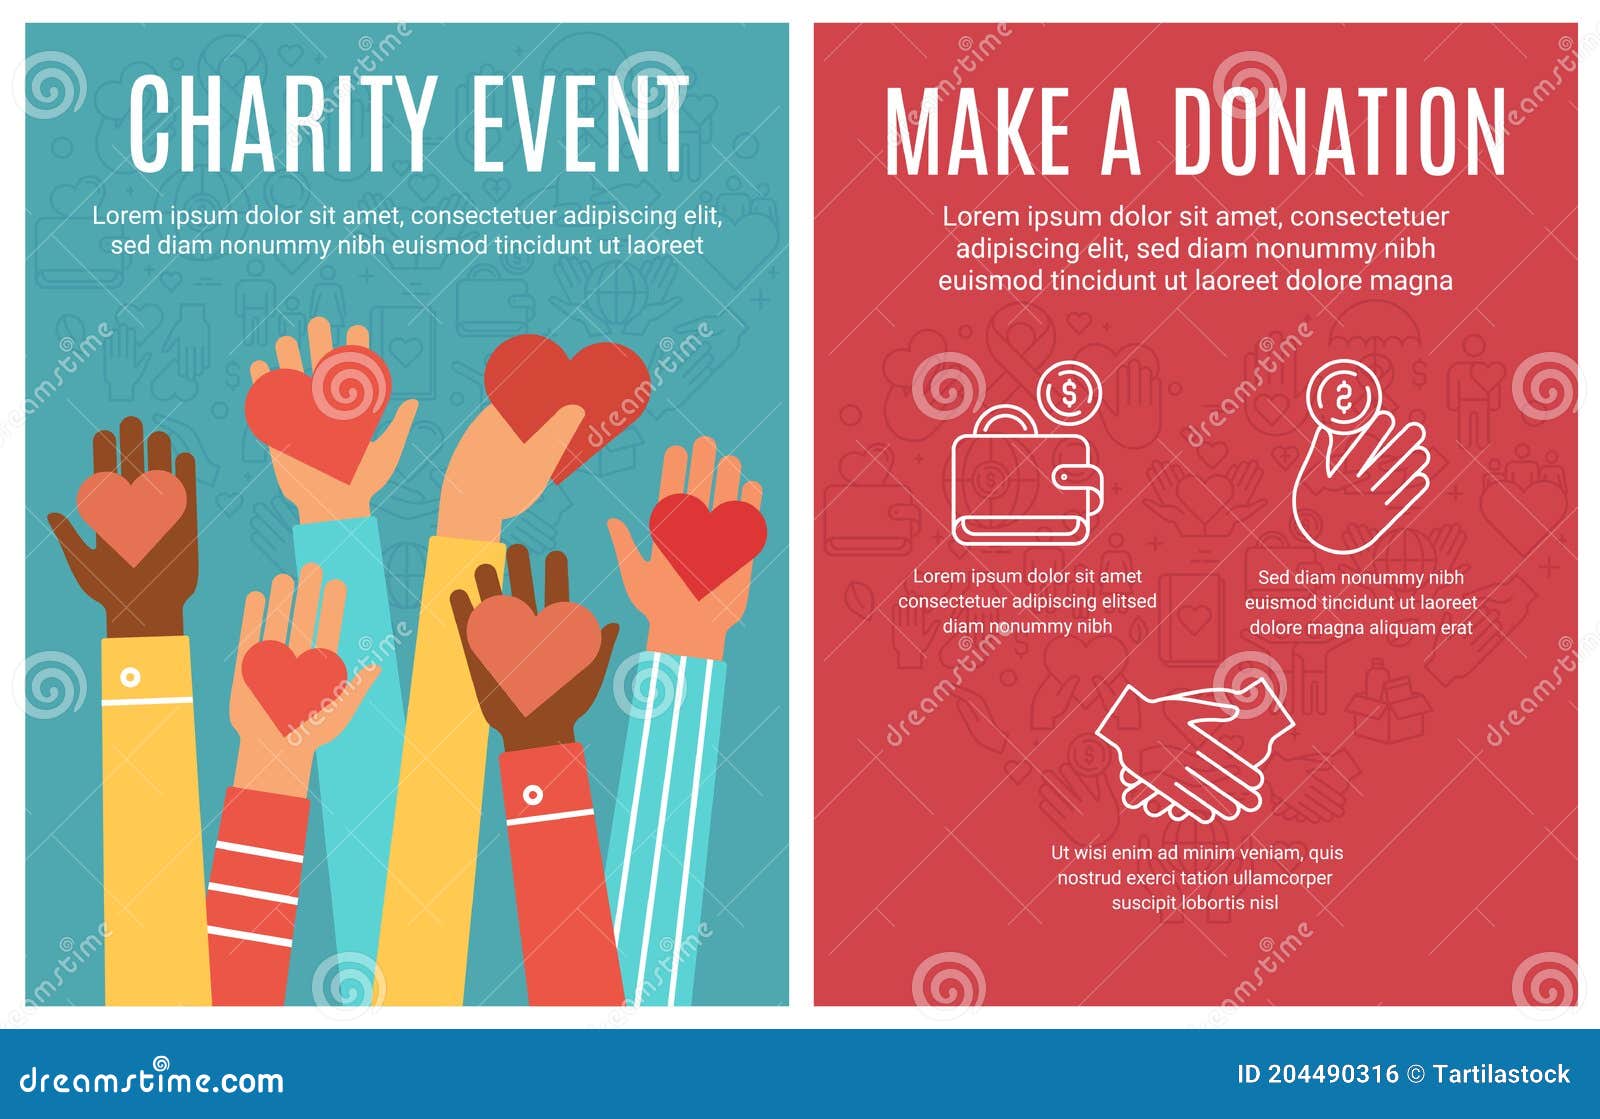 Charity Event Flyer. Donation and Volunteering Poster. Hands Inside Charity Event Flyer Template